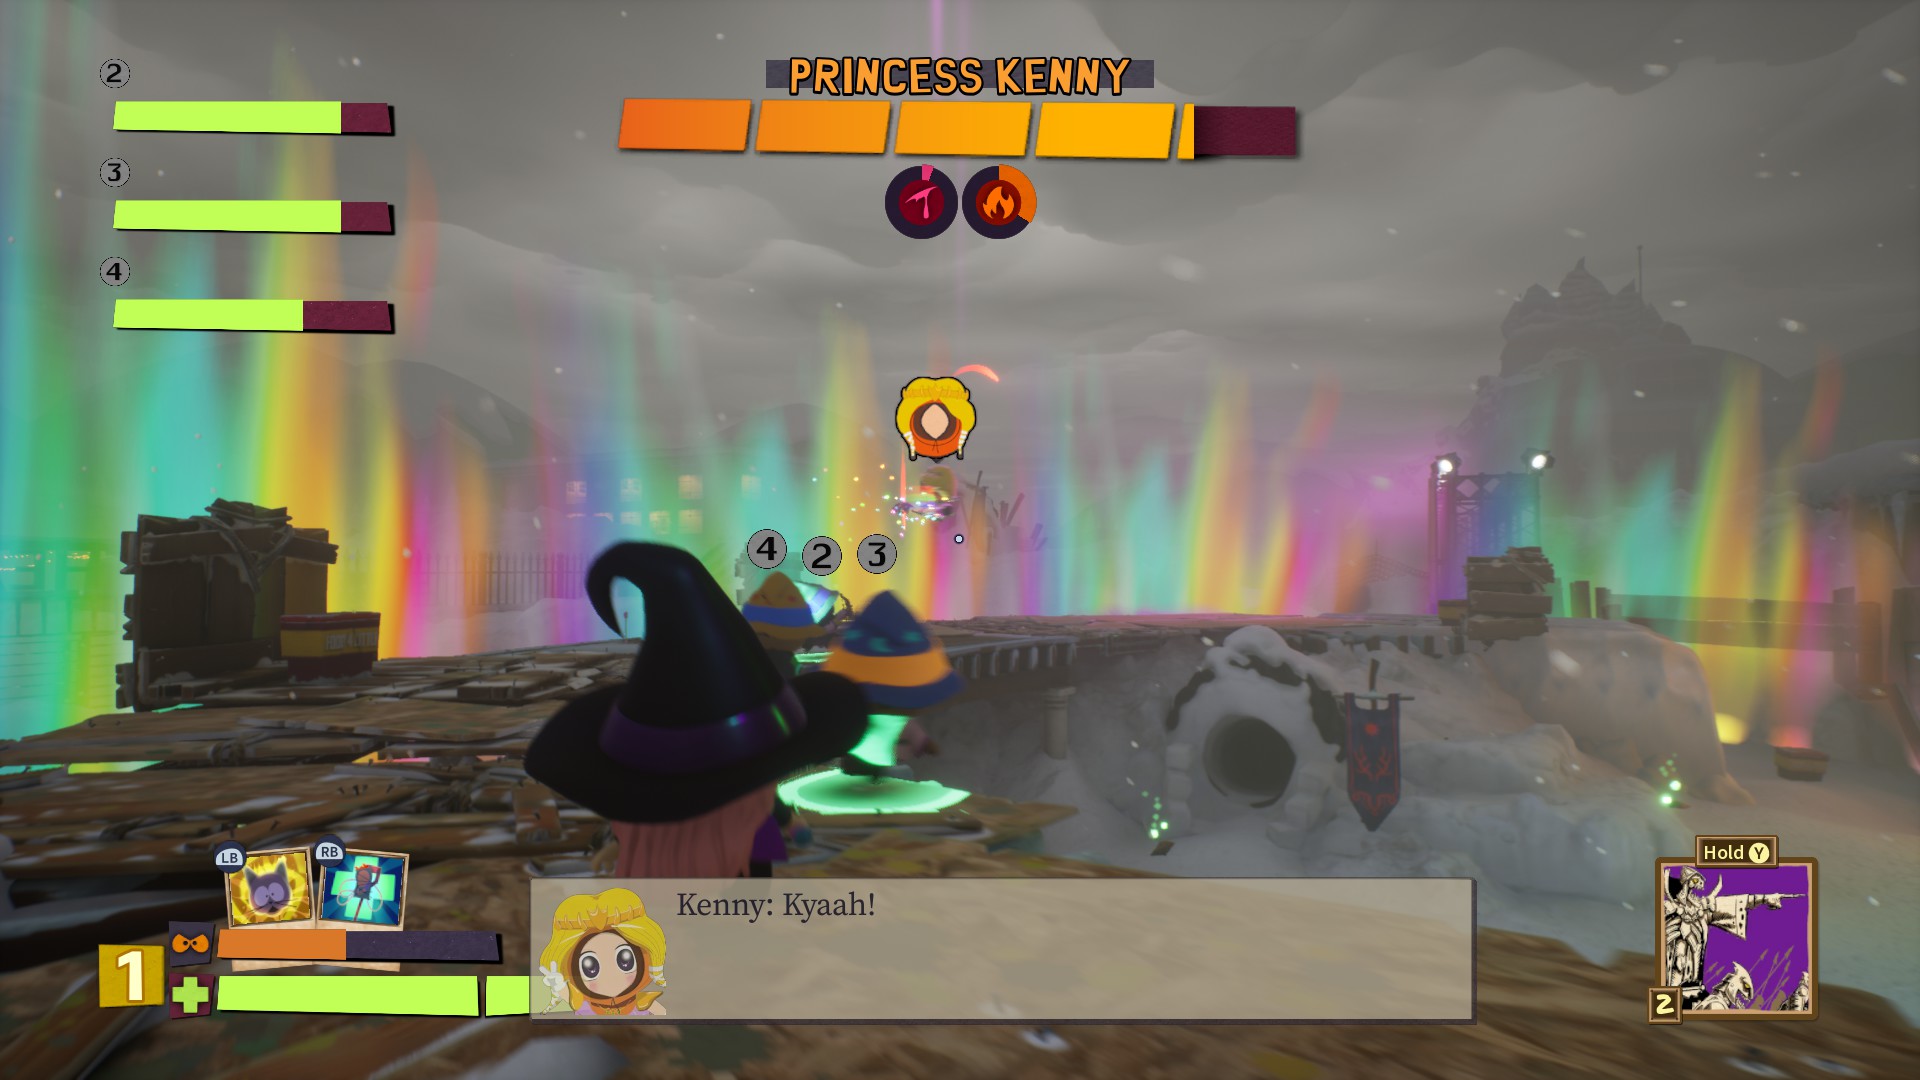 An in game image of the Princess Kenny boss fight from South Park: Snow Day